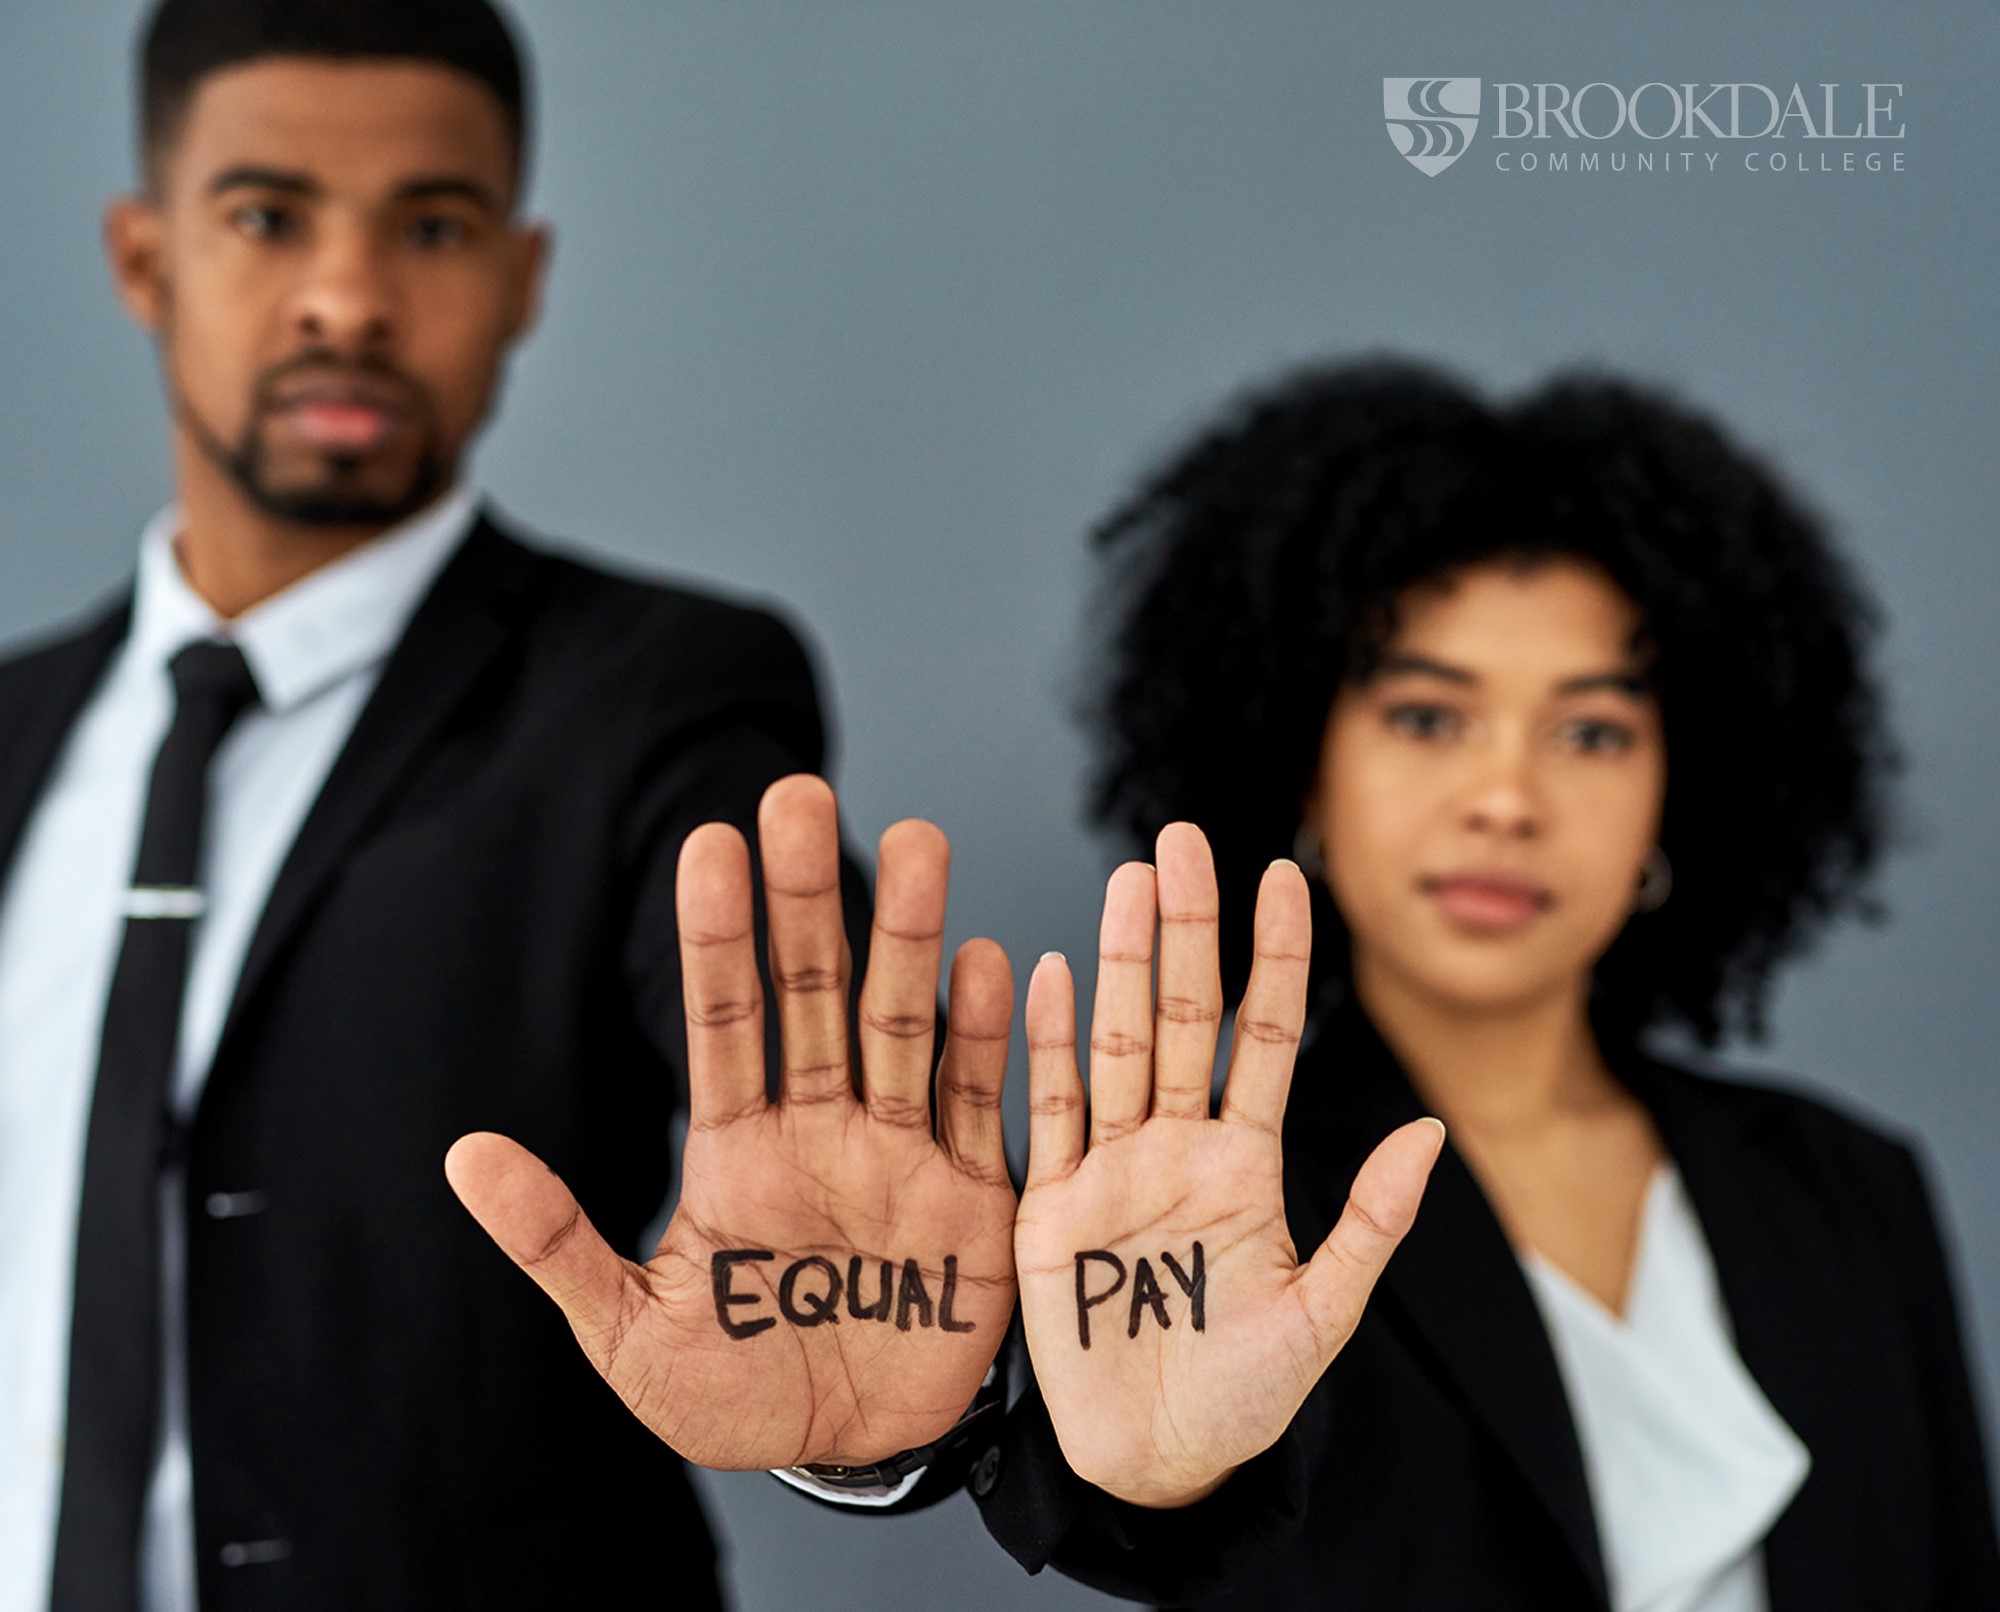 Two persons of color one male and one female holding their hands up with the male palm reading Equal and the female palm reading Pay. Both professionally dressed.